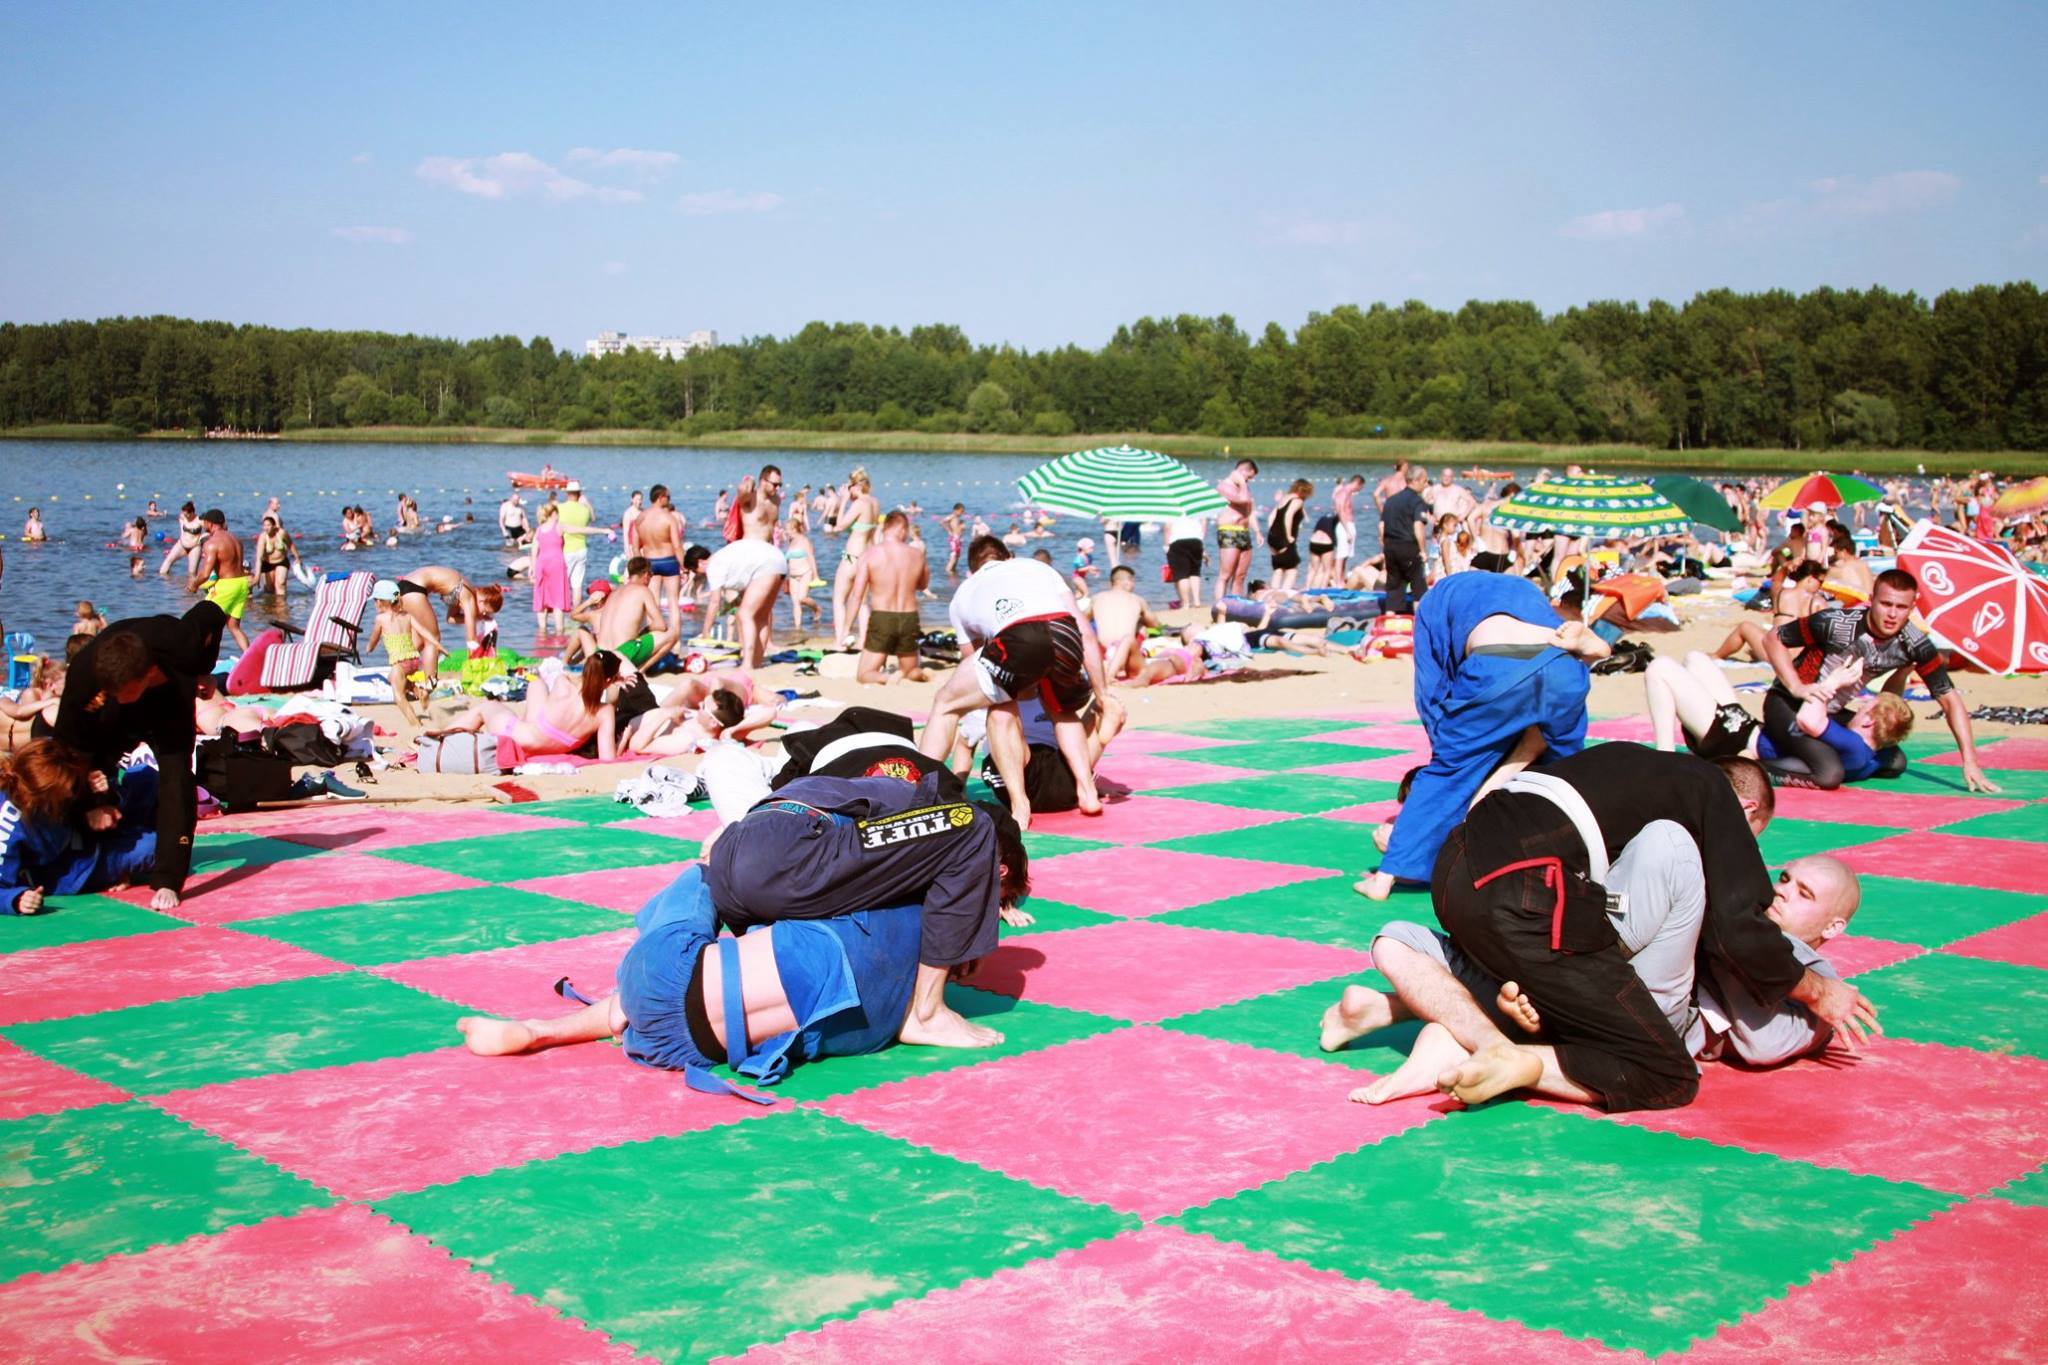 Training Report: Epic BJJ Picnic on the Beach in Poland